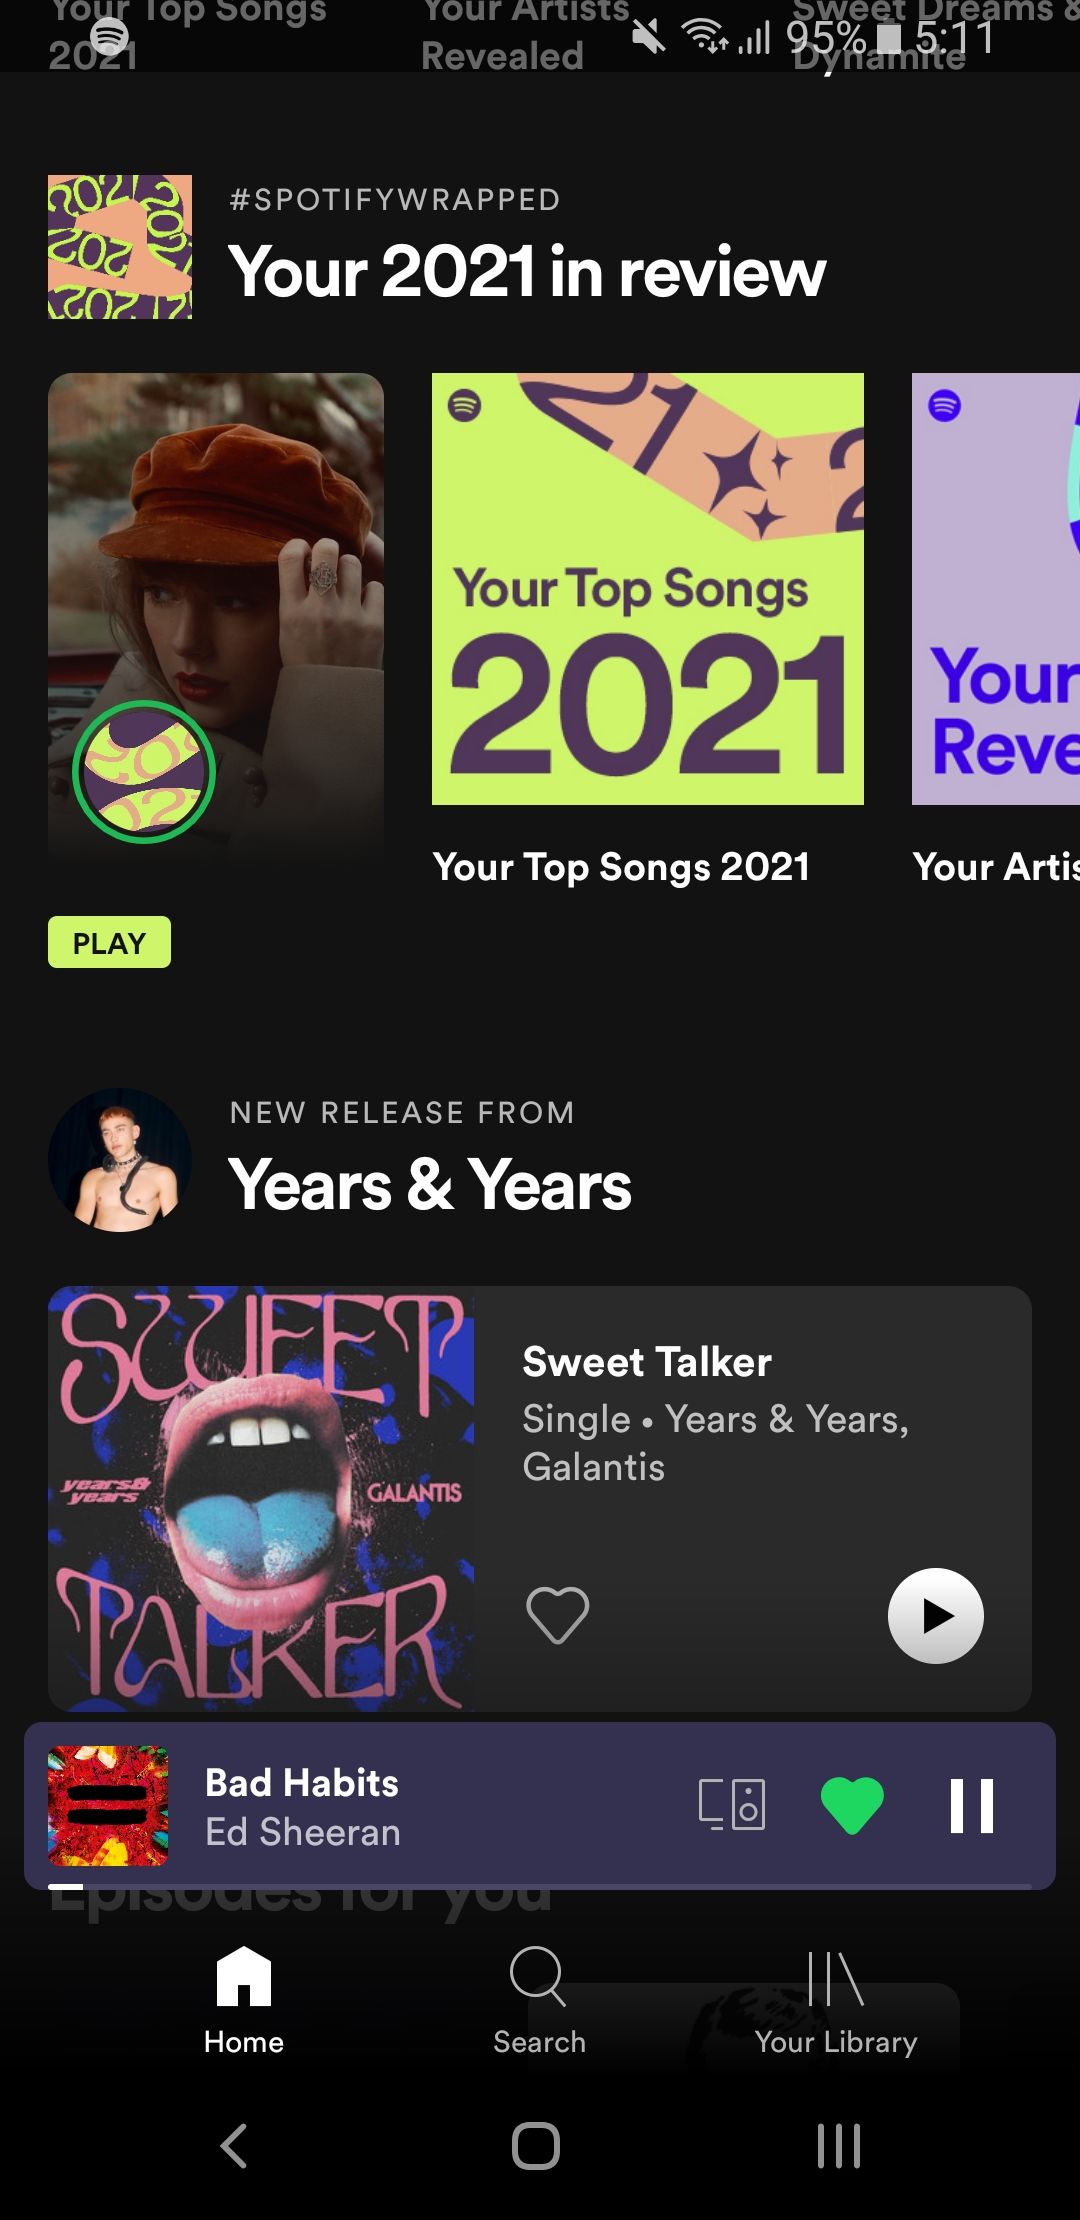 wrapped on spotify home